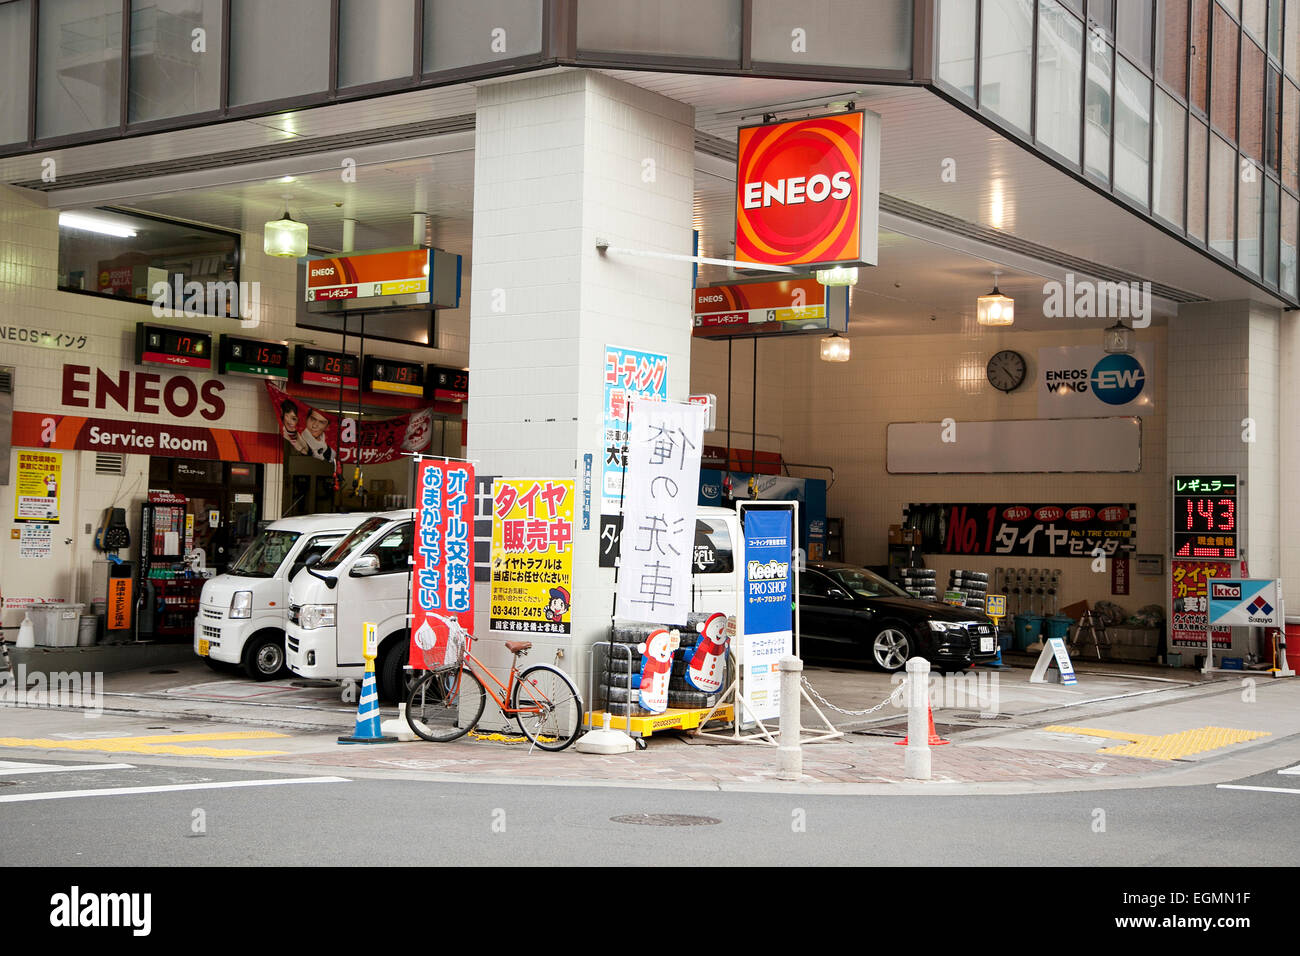 A gasoline stand in Tokyo displays gasoline prices on February 27, 2015. Gasoline prices had been steadily falling since July 2014, but have risen recently linked to a rebound in crude oil prices. The price at this stand is 143 yen (1.20 USD) per liter. © Rodrigo Reyes Marin/AFLO/Alamy Live News Stock Photo